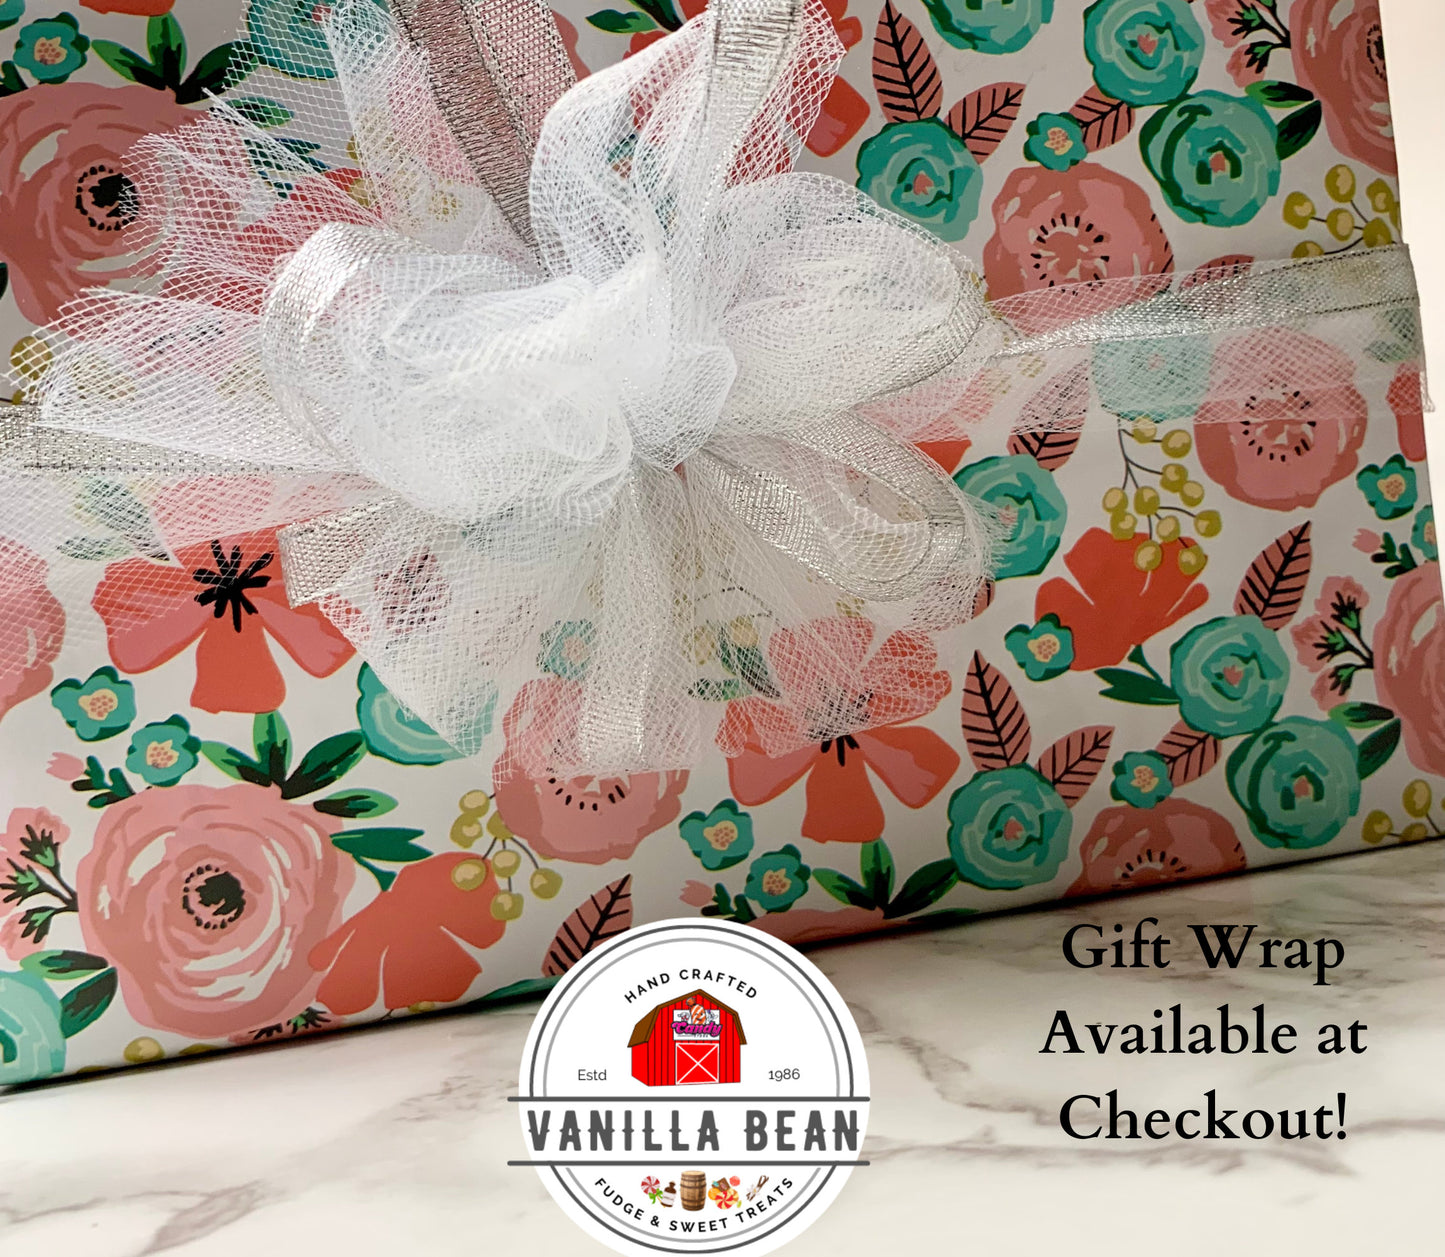 New! Chocolate Fudge candy, Handmade Old Fashioned cocoa fudge,  1 1/2 pound pan of fudge. Makes a great gift, Flavor variety Choices. Chocolate gifts